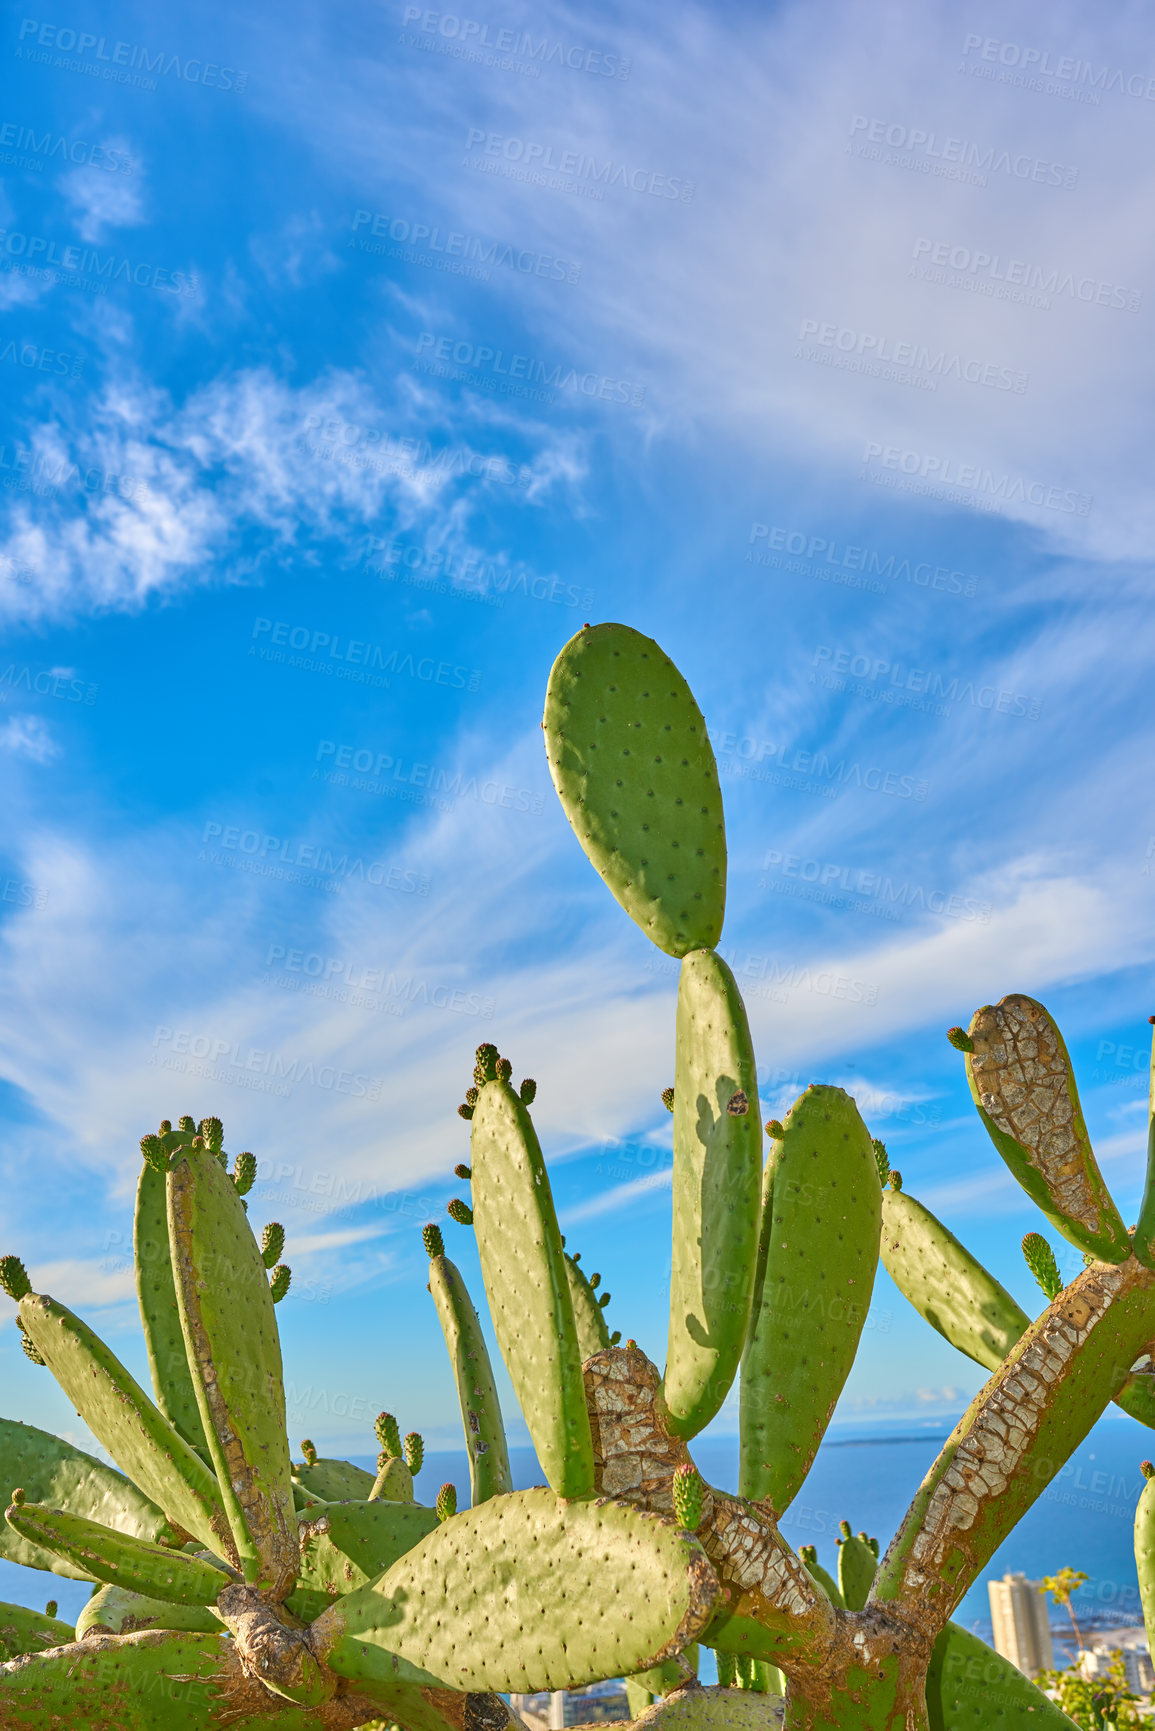 Buy stock photo Closeup of cactus flowers and plants on mountain side in South Africa, Western Cape with ocean background. Landscape of beautiful green indigenous African cacti with ocean view and bright blue sky  